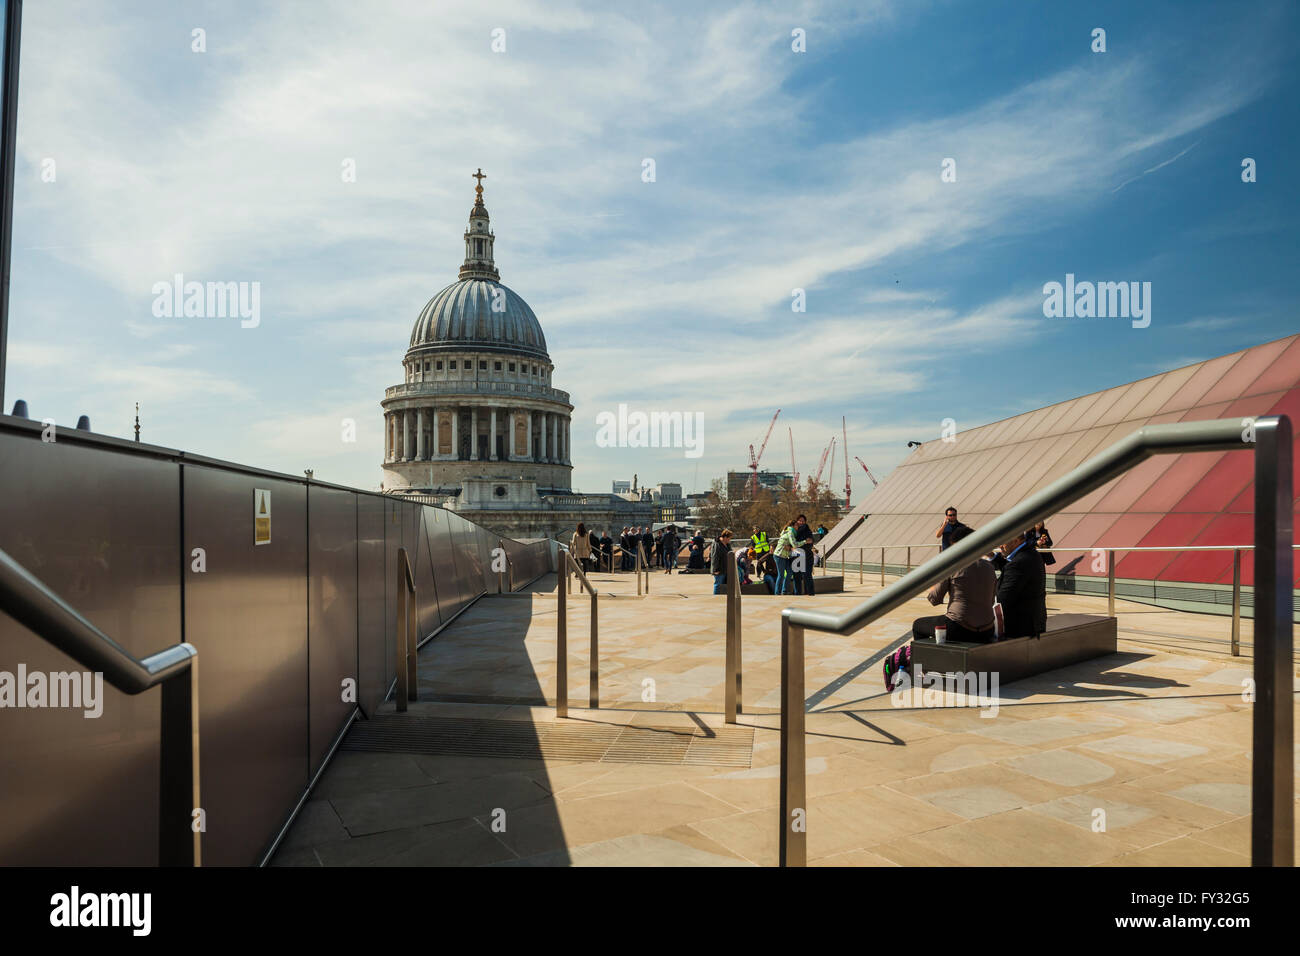 People enjoy sunny spring day on a roof top, St Paul's cathedral dome in the distance. London, England. Stock Photo